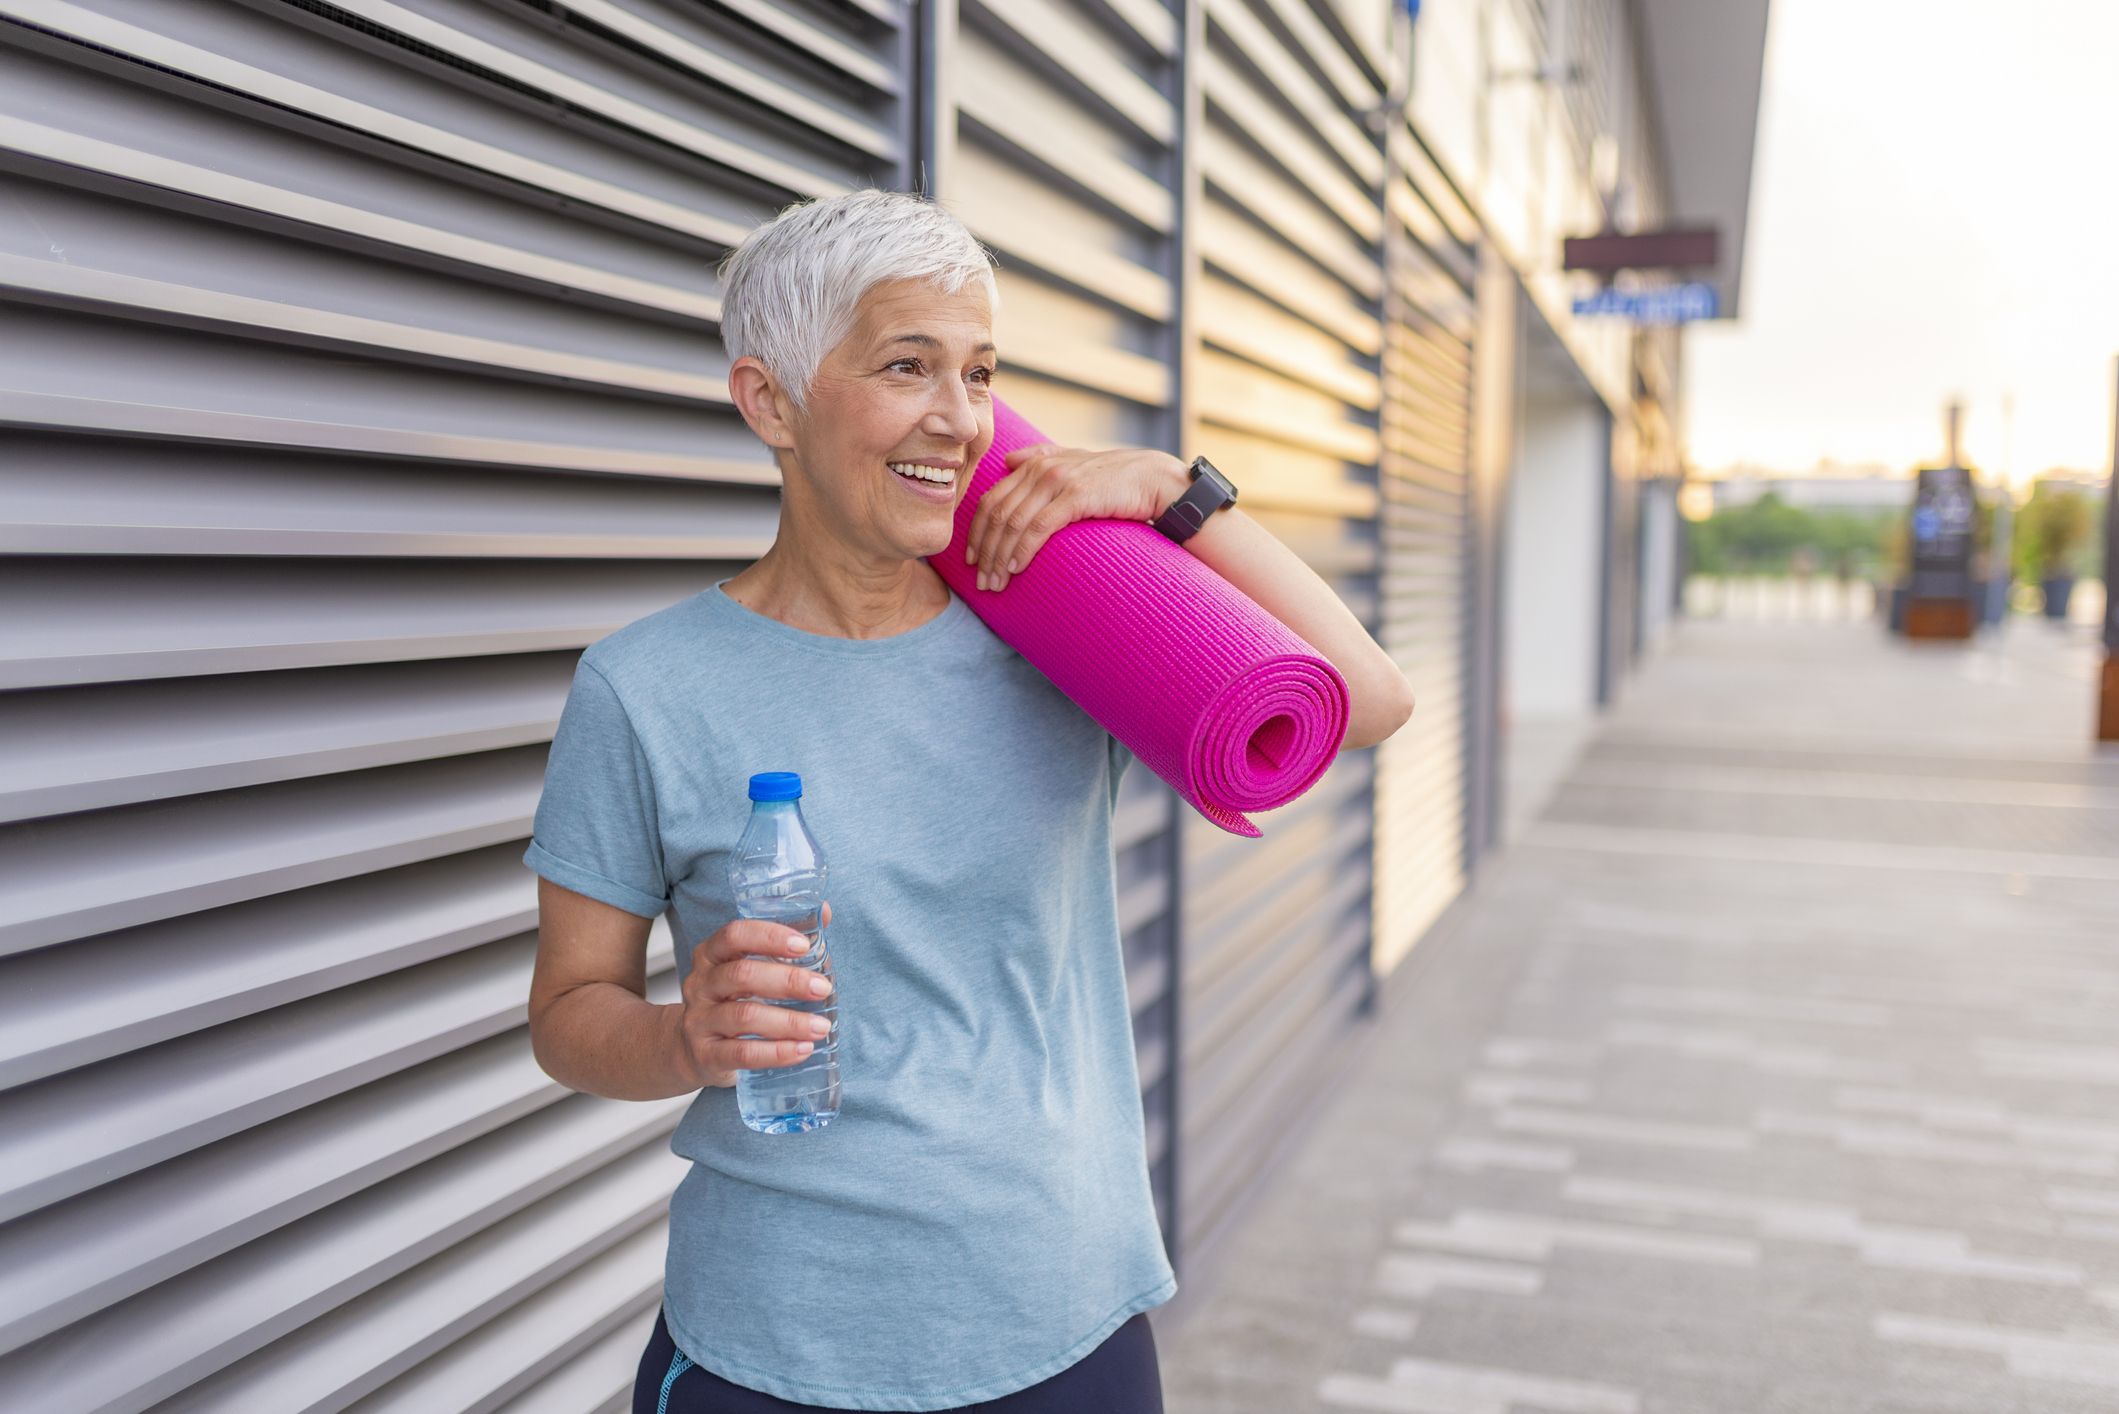 An older woman poses with a yoga mat and a bottle of water.